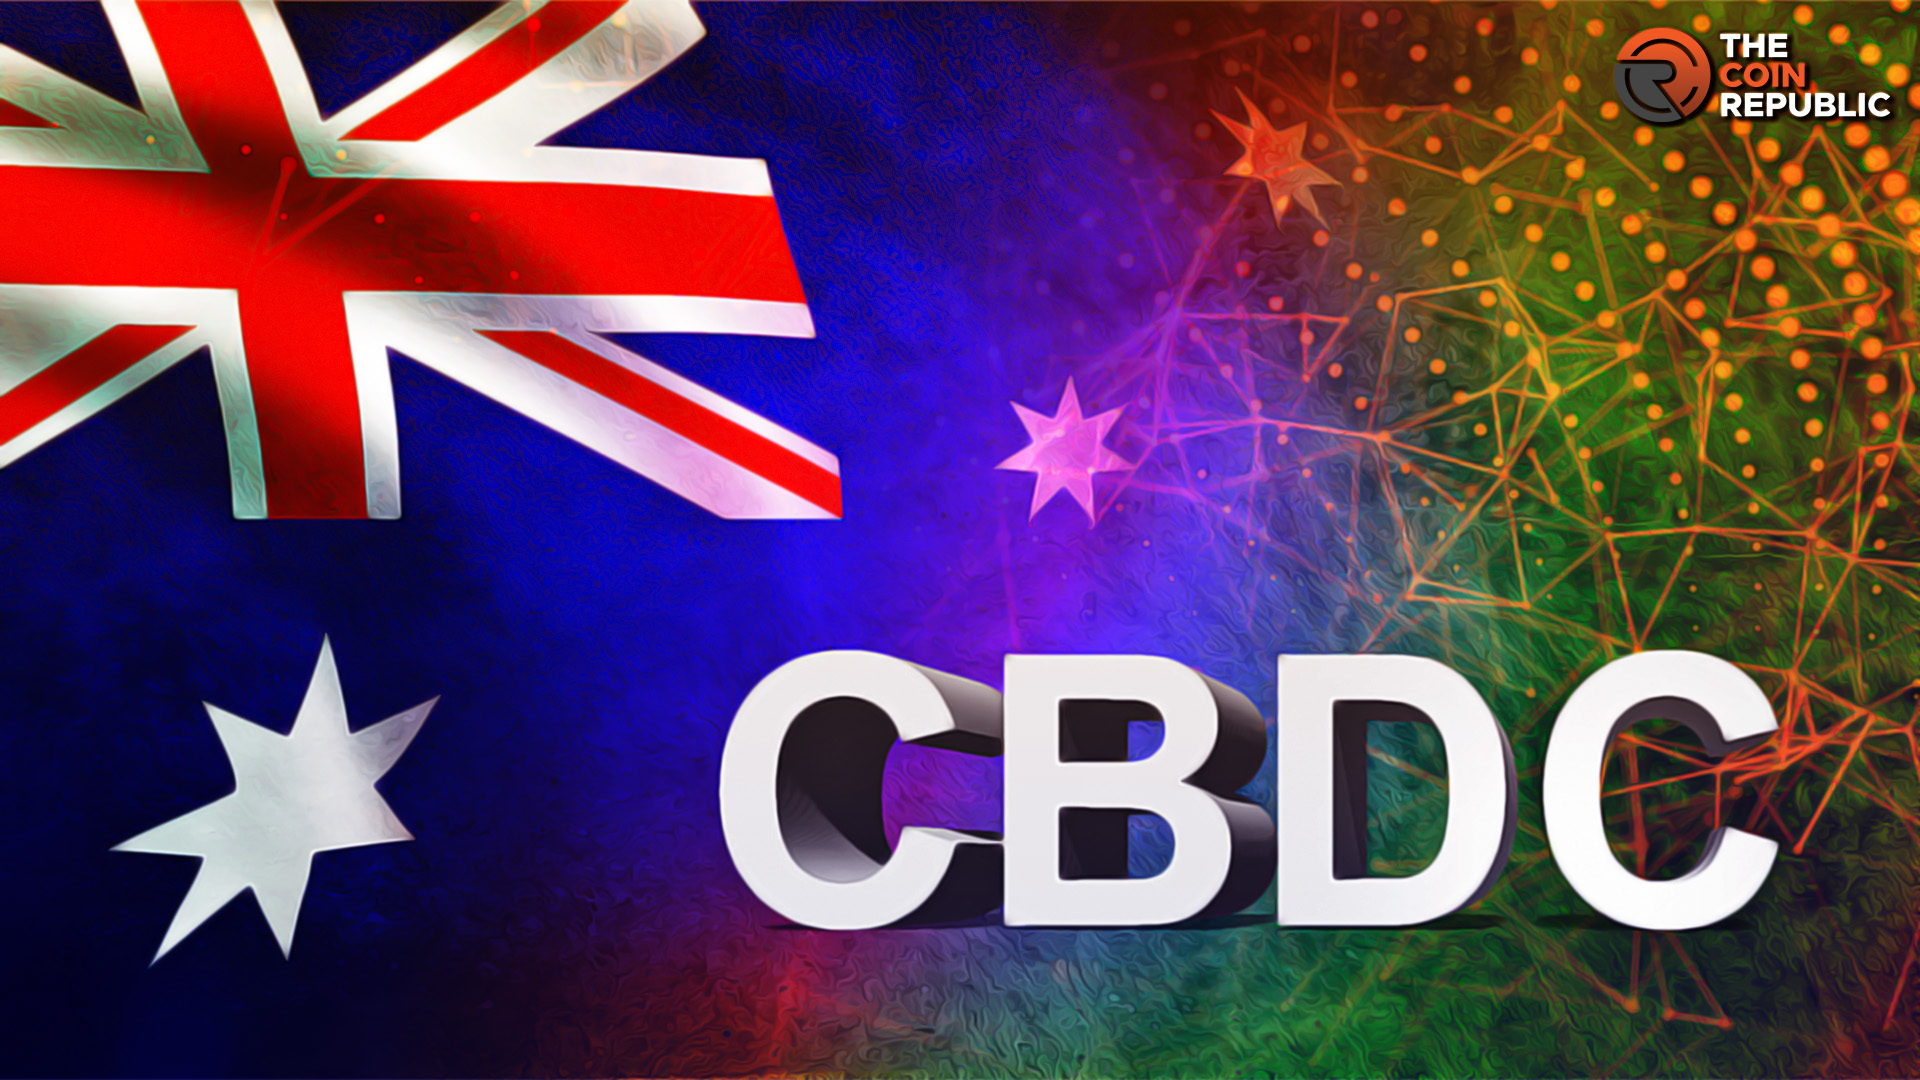 Australian Central Bank Sees Potential in CBDC, But Launch Could Delay